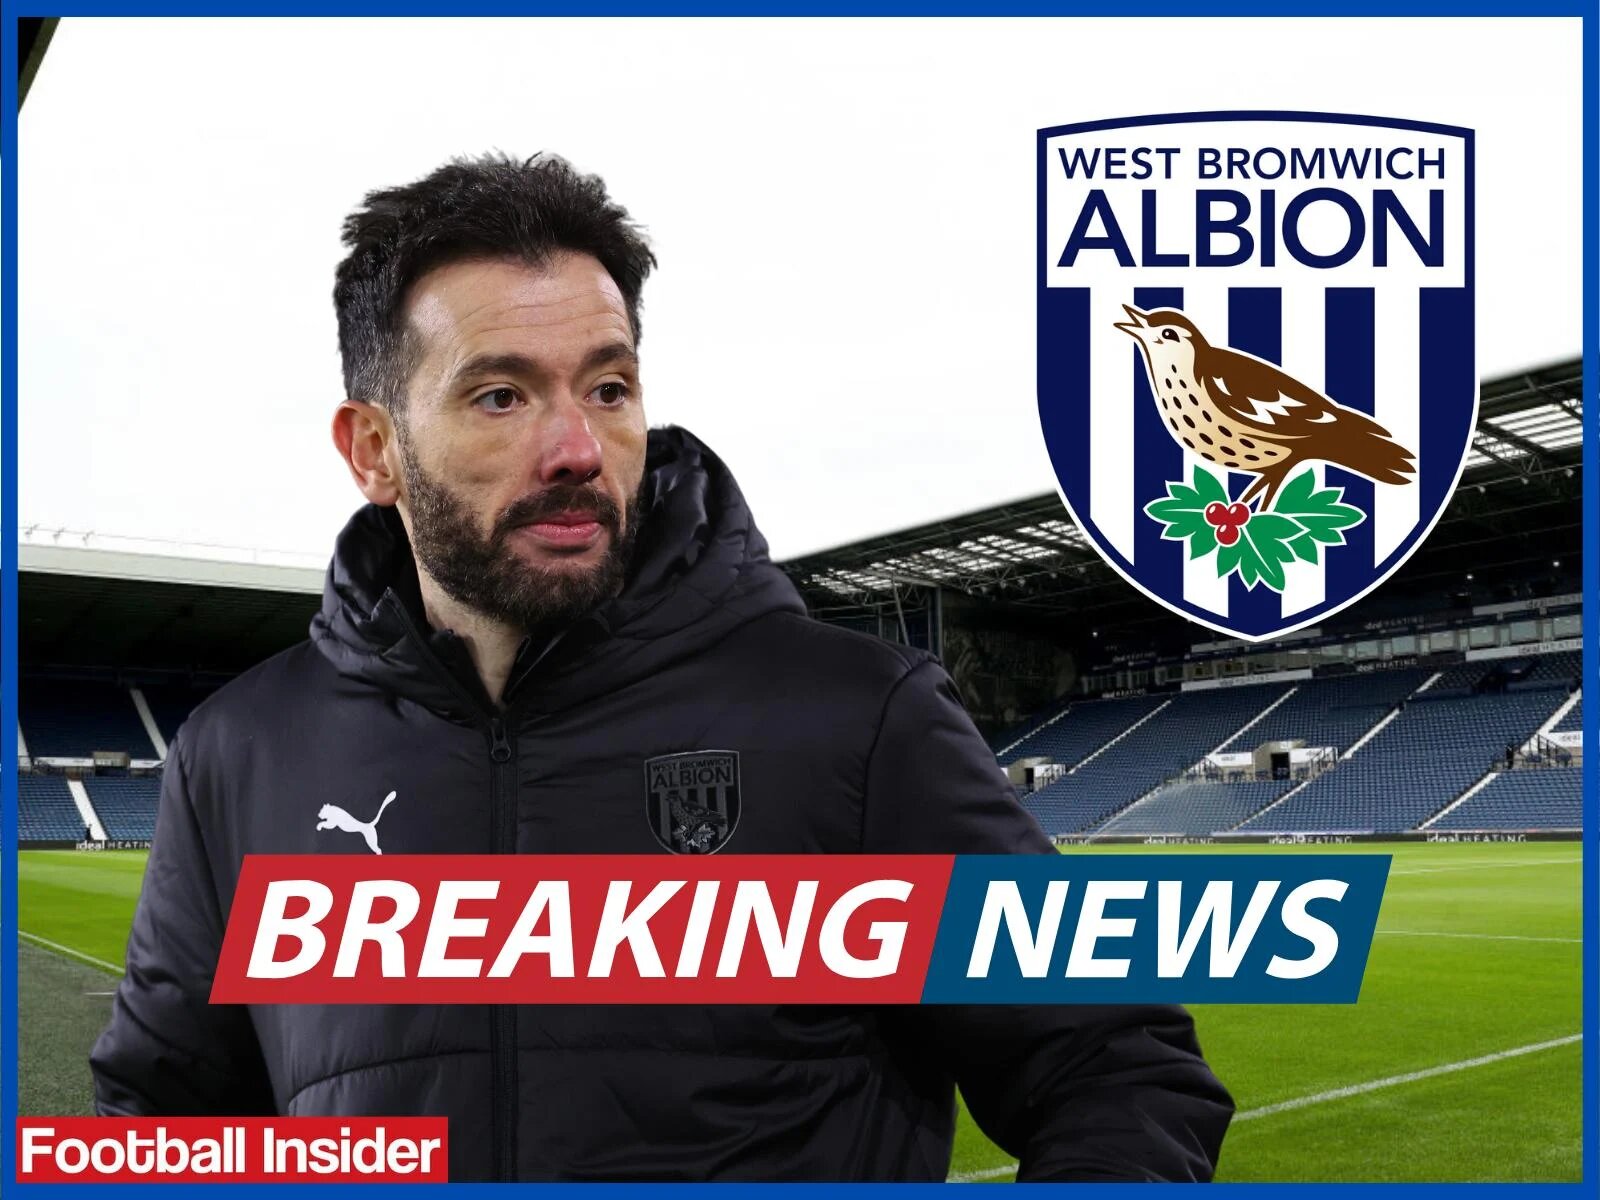 Seal deal: West Brom seal deal for versatile 25-year-old